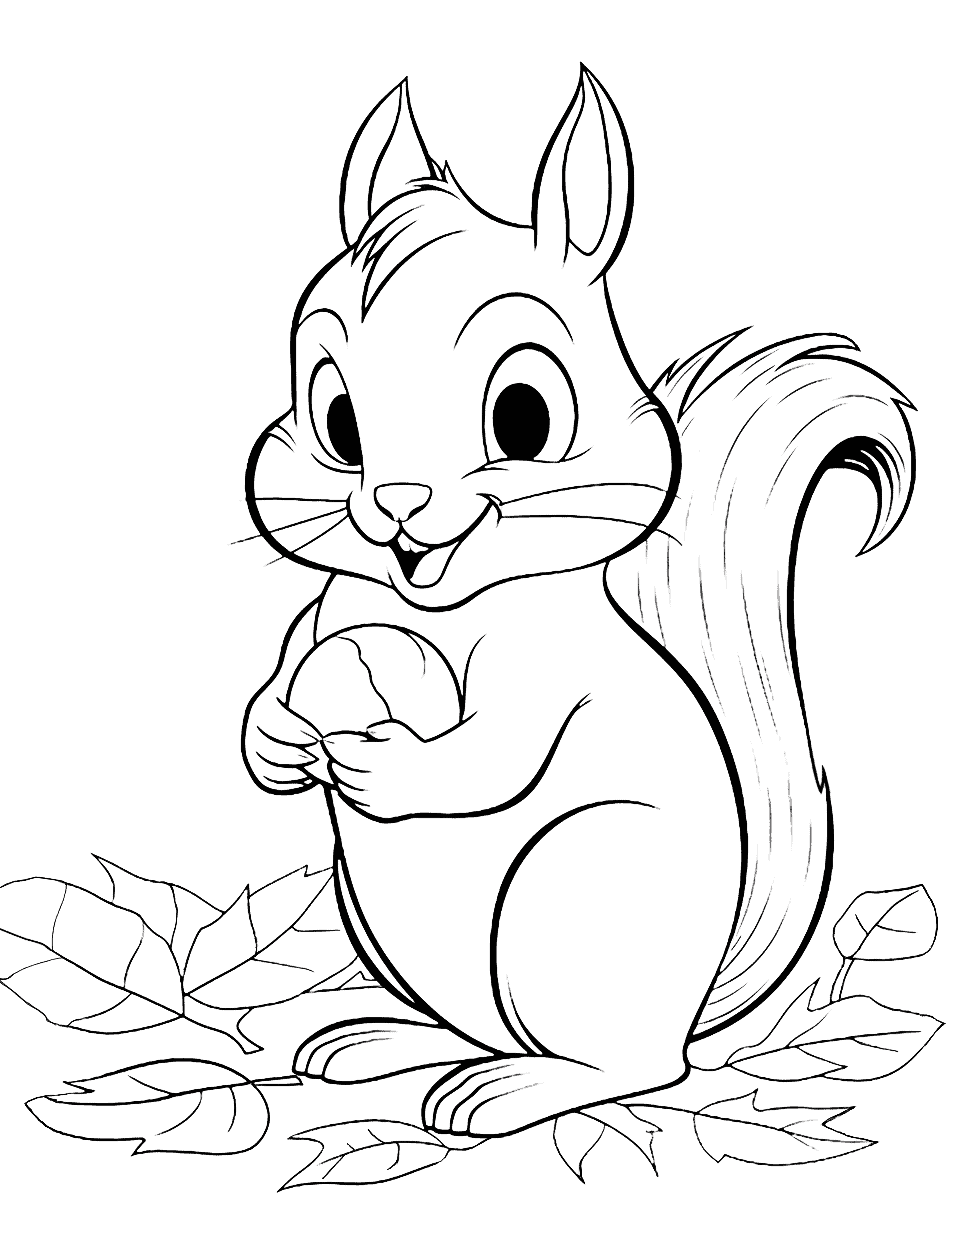 Happy Chipmunk Animal Coloring Page - A chipmunk happily gathering nuts and acorns in a forest.